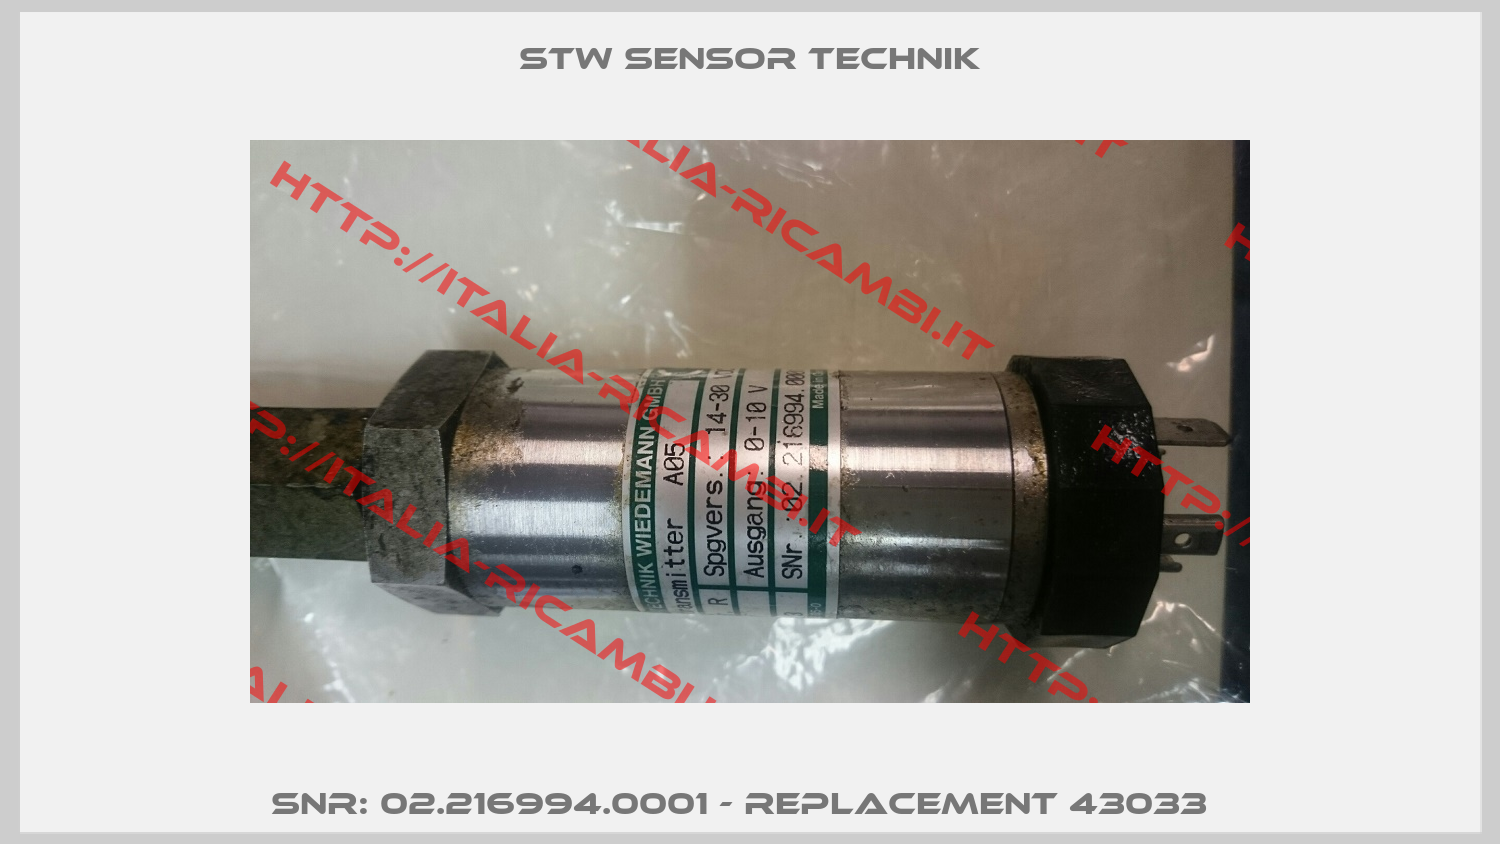 SNr: 02.216994.0001 - replacement 43033  -3